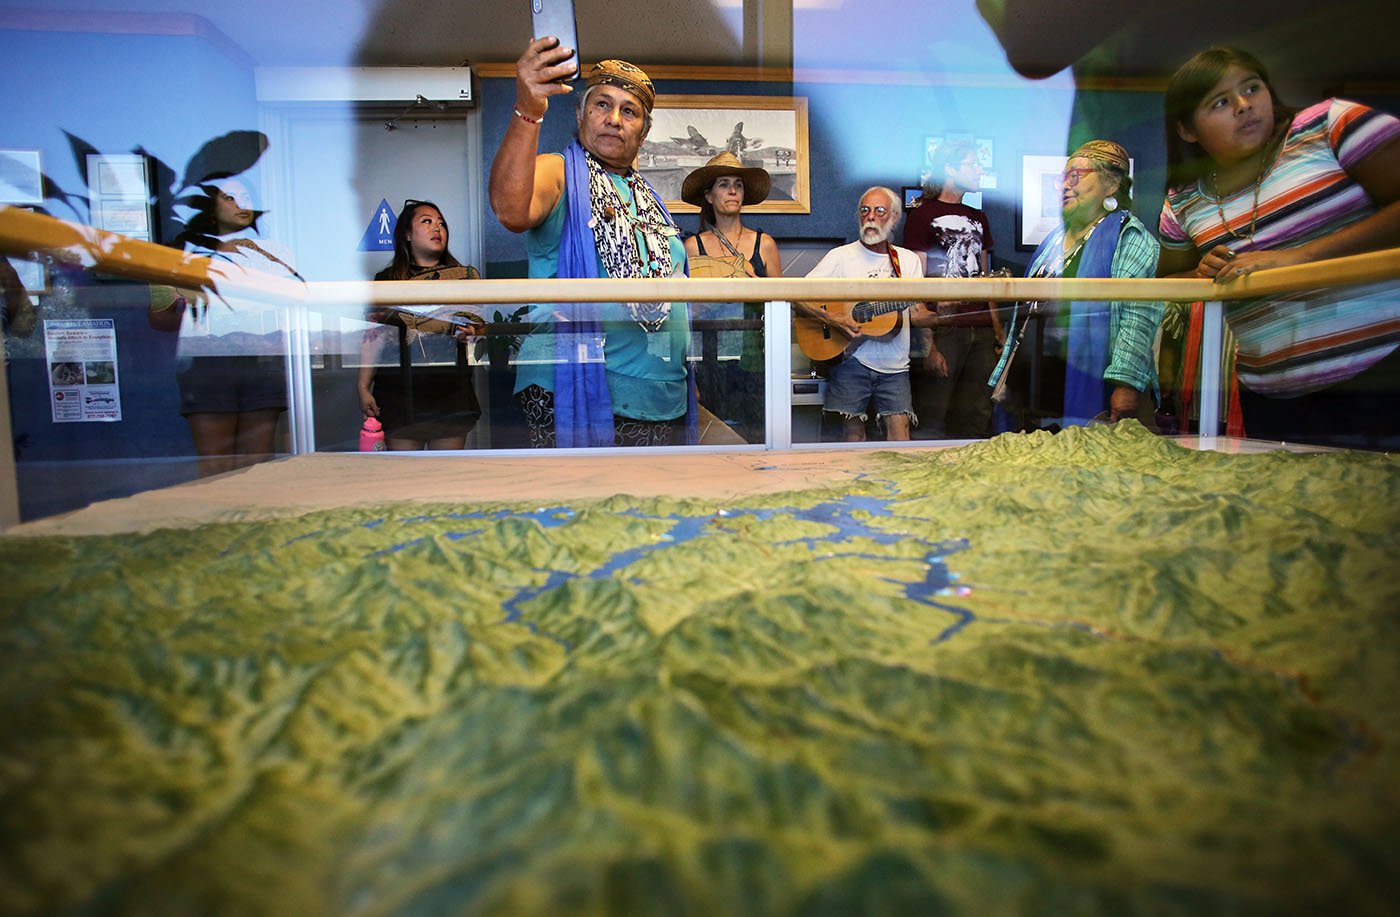  Shasta Lake, CA — Chief Caleen Sisk photographs the topographic map of Shasta Dam and its tributaries including the McCloud River, homeland of the Winnemem Wintu people. September 25, 2019. Tom Levy/The Spiritual Edge 